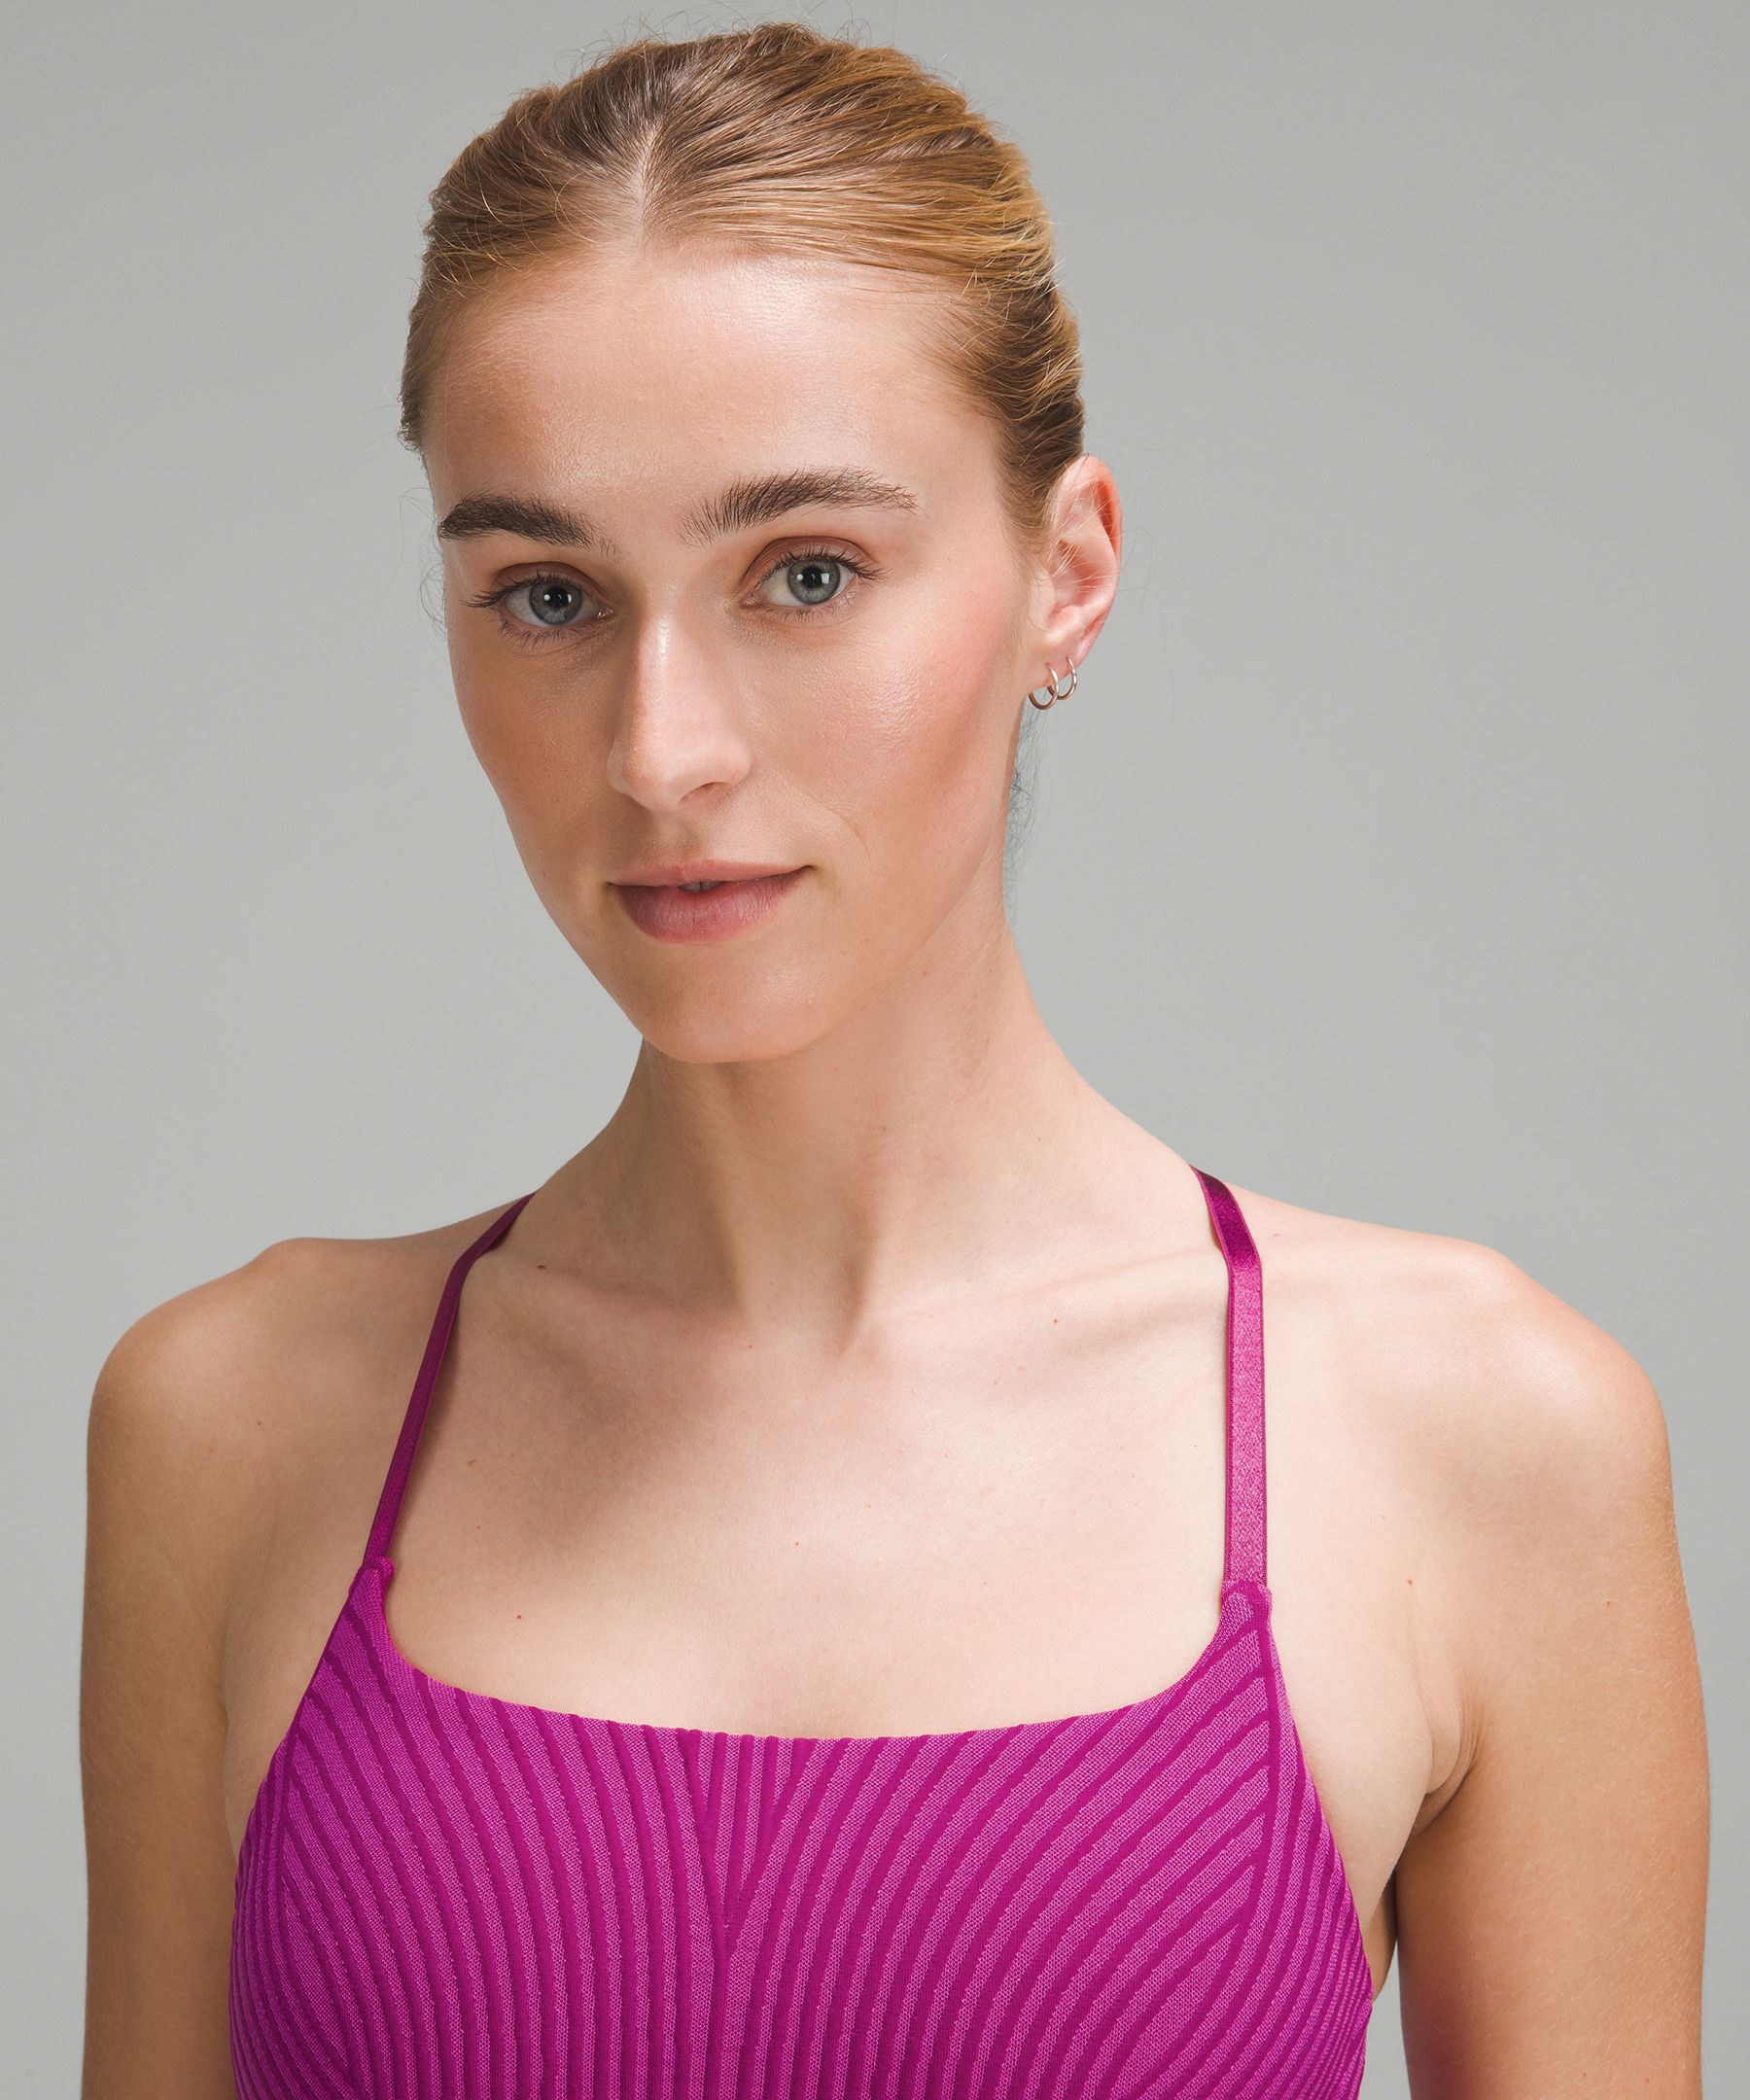 Lululemon Strappy Seamless Yoga Shelf Tank Top Size 6 NWT - $58 New With  Tags - From Leslee